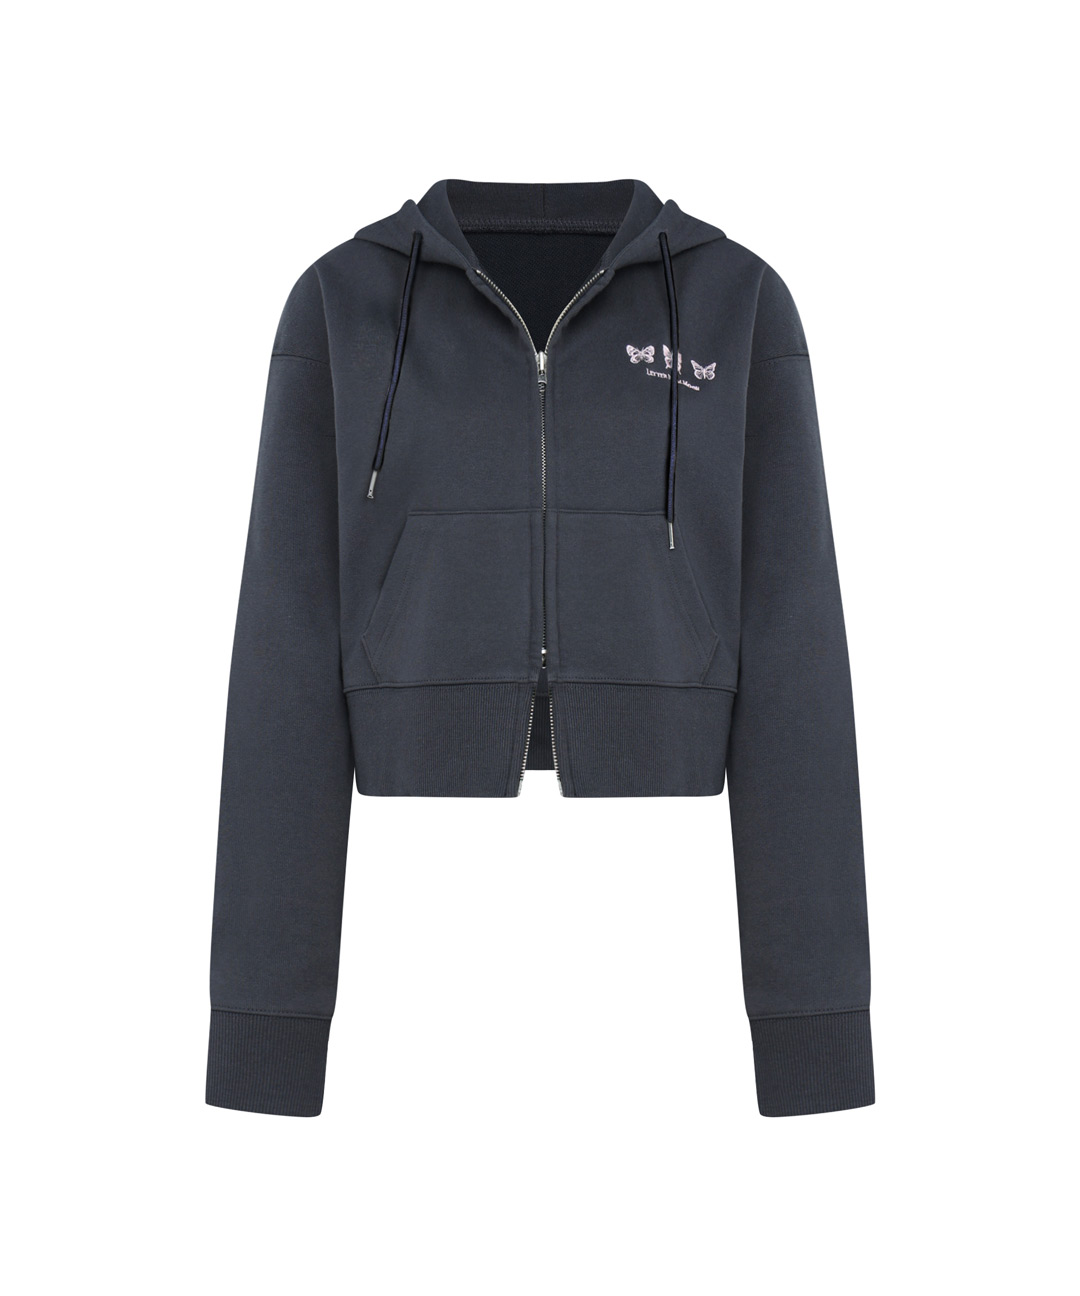 Triple Butterfly Embroidered Two-way Hood Zip up ( Charcoal )